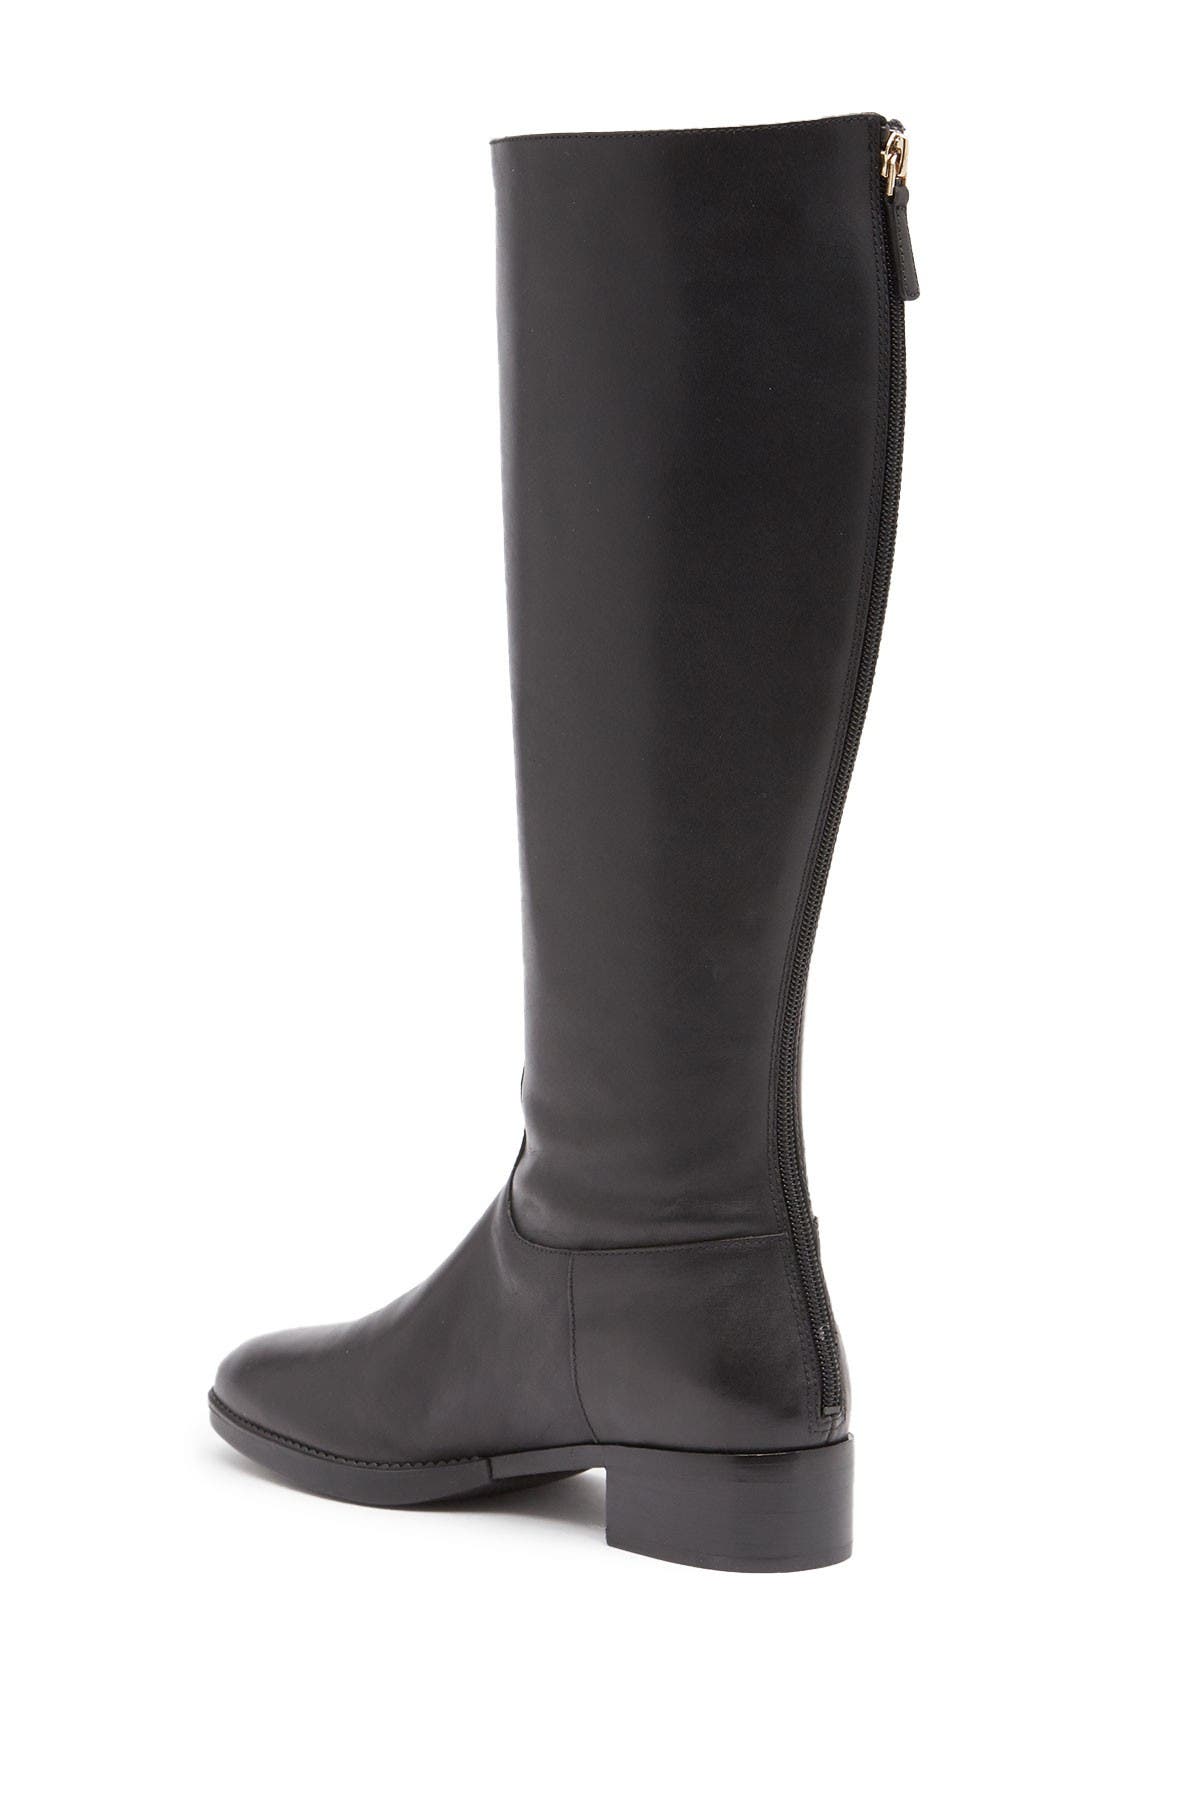 tory burch sidney over the knee boot